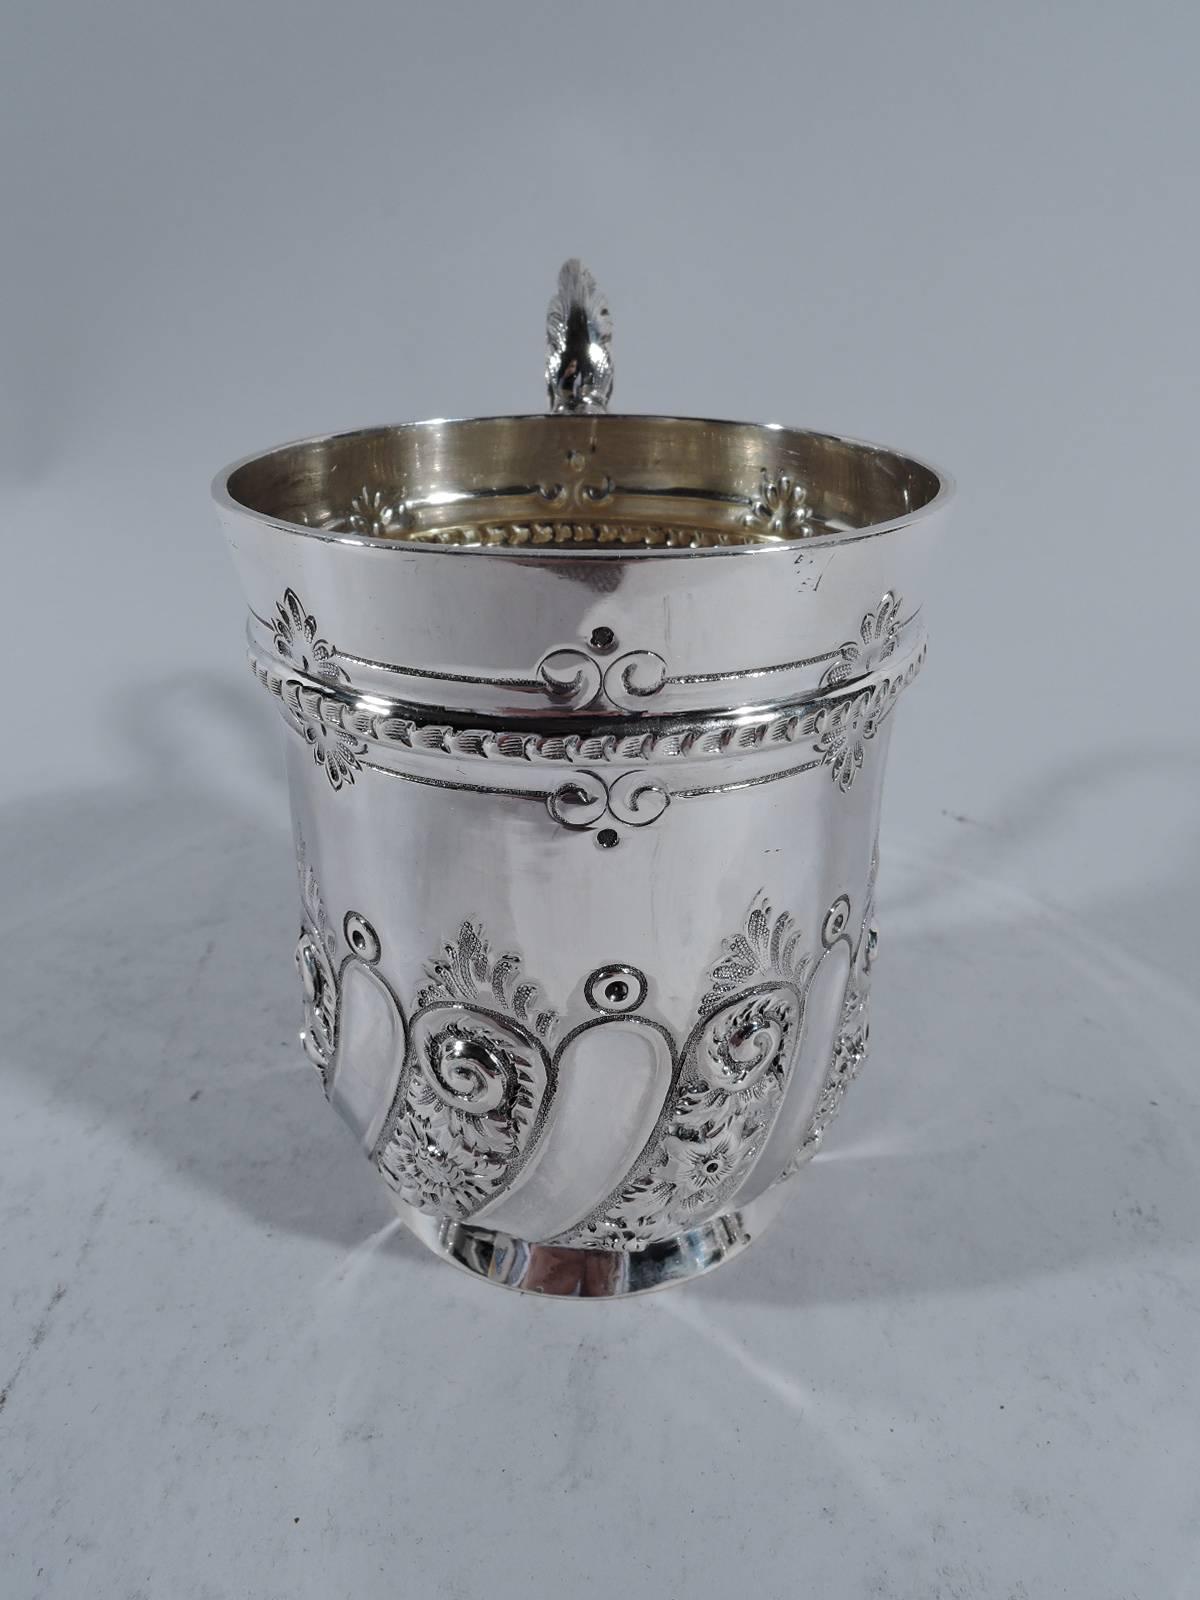 Victorian sterling silver baby cup. Made by Martin, Hall in Sheffield in 1895. Curved bottom, spread foot, and leaf-capped scroll handle. Near rim ornamental band. At bottom flutes alternating with ornamented gadroons. Sweet and pretty. Hallmarked